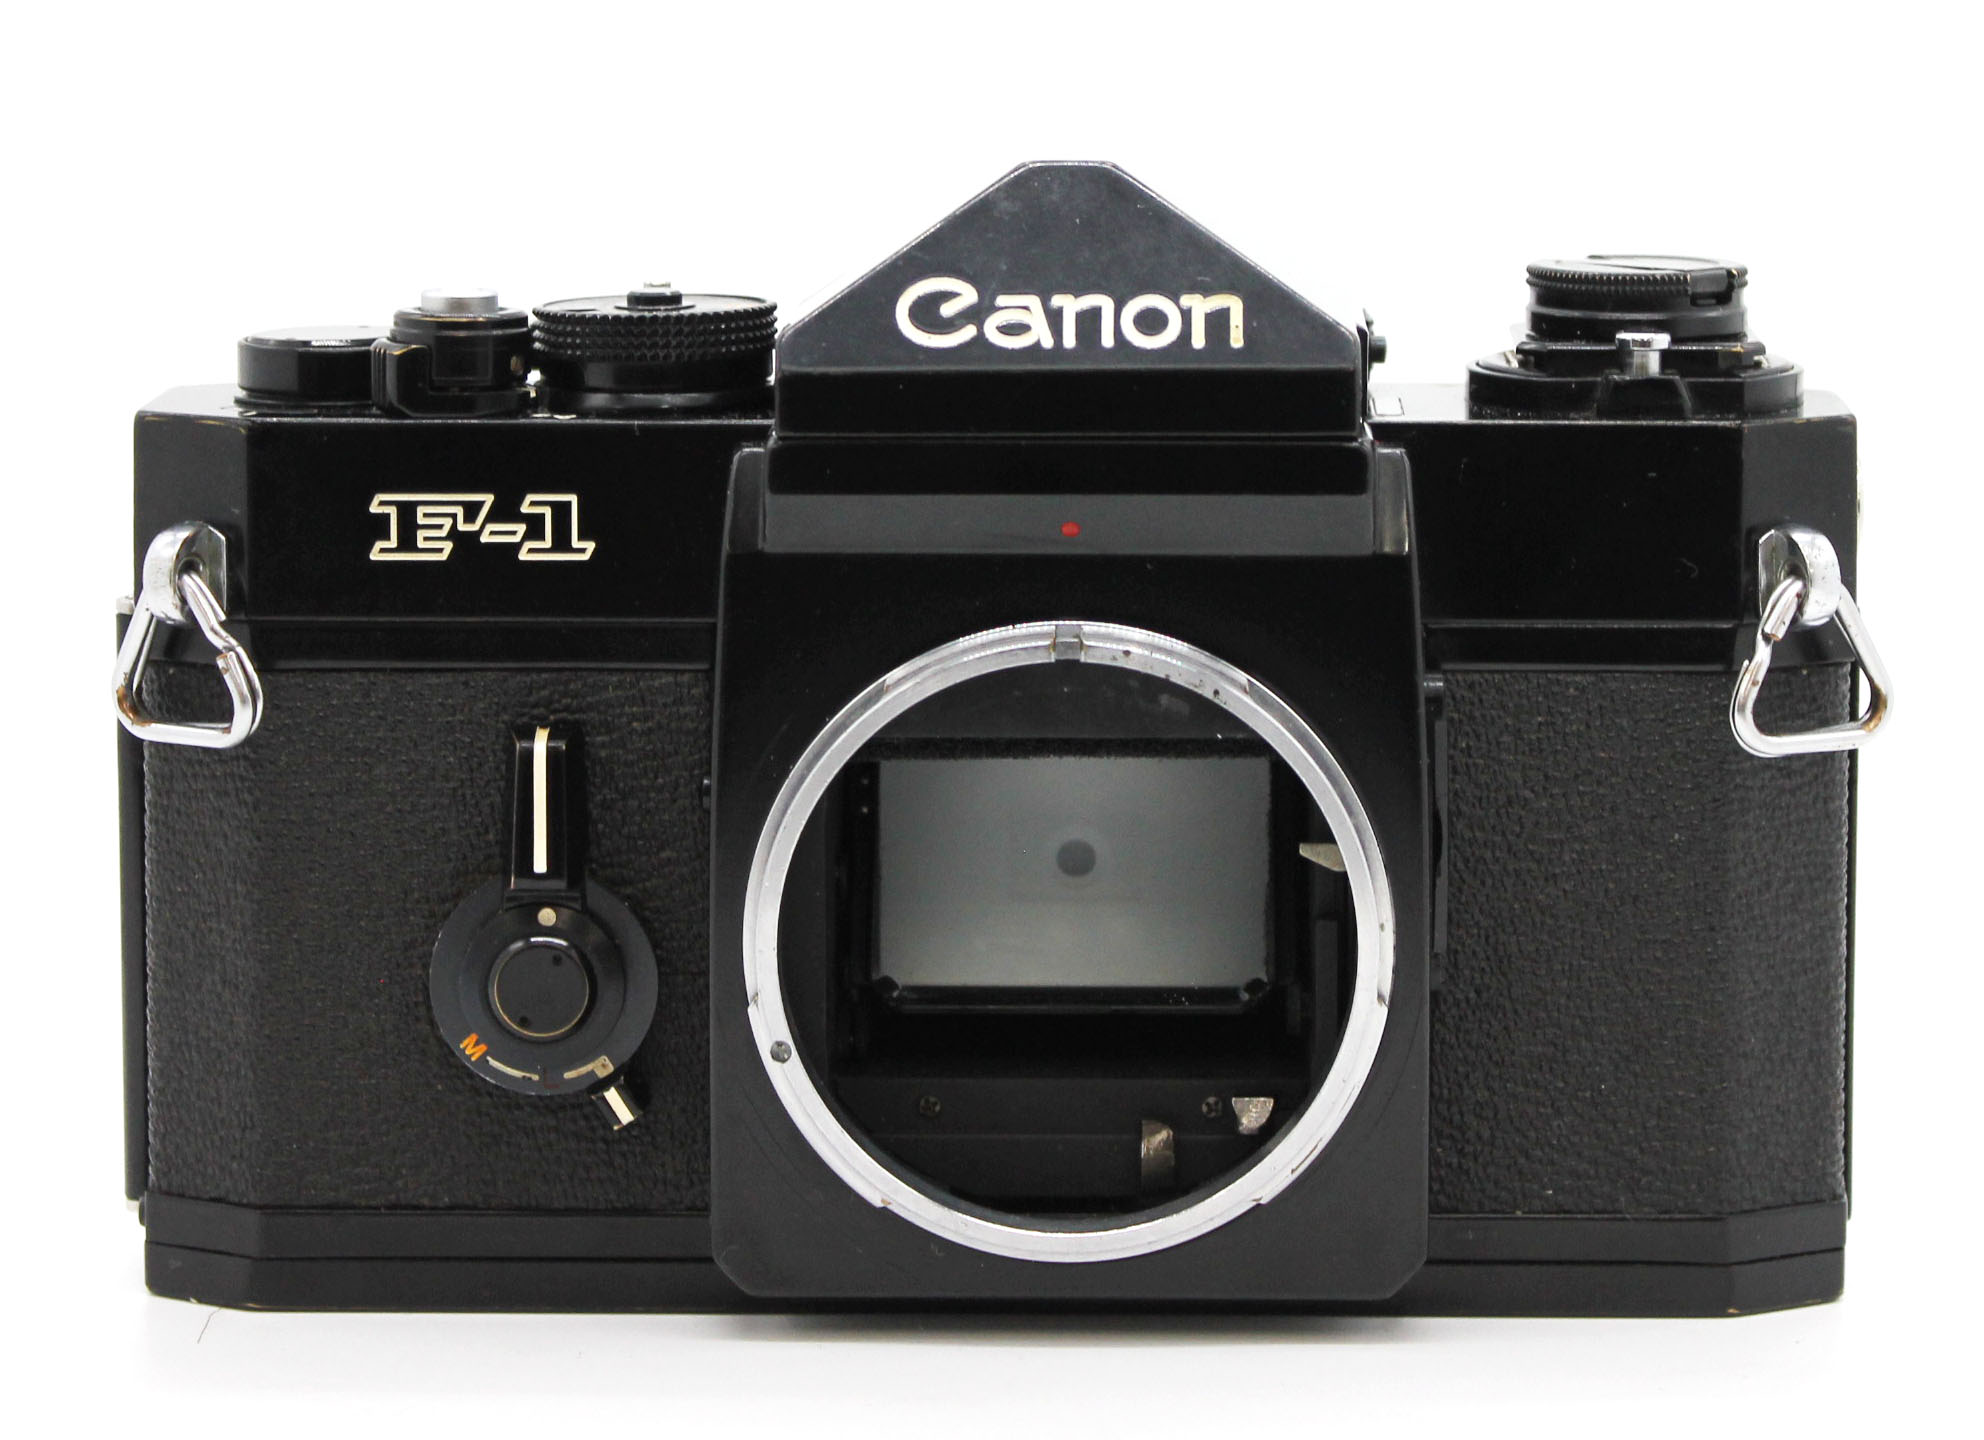  Canon F-1 35mm SLR Film Camera with FD 50mm F/1.4 S.S.C. Lens from Japan Photo 3